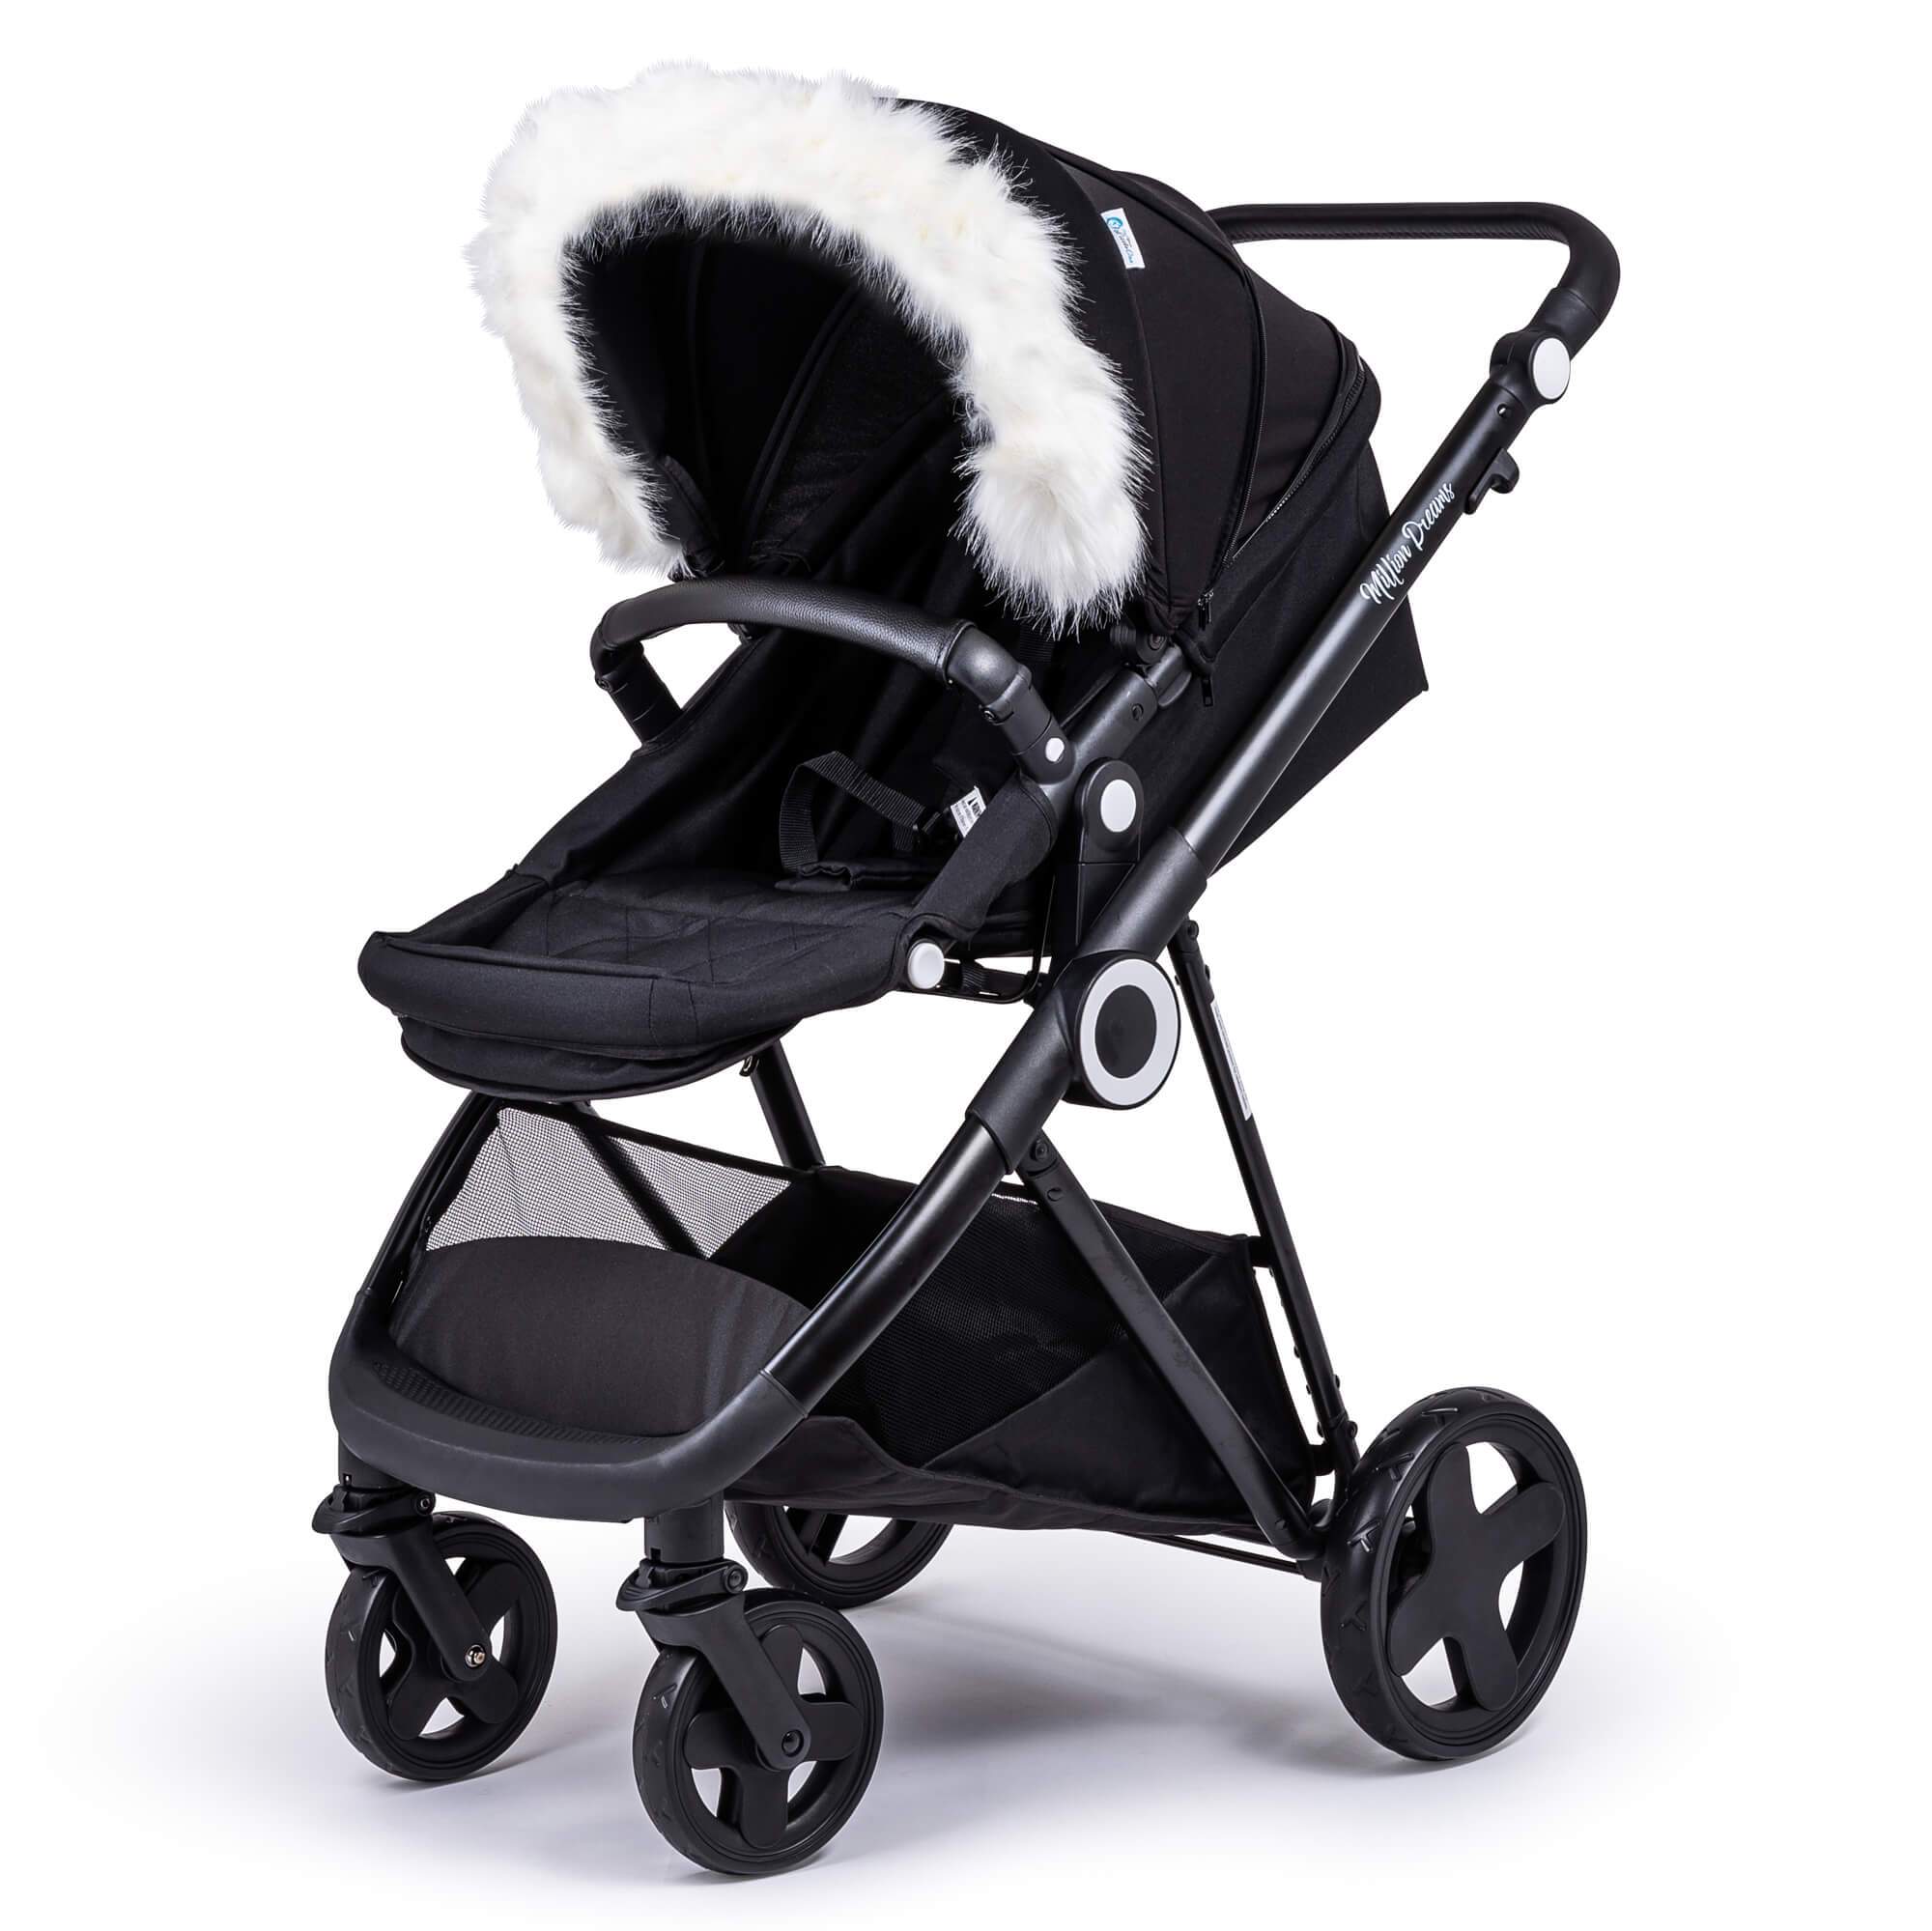 Pram Fur Hood Trim Attachment for Pushchair - White / Fits All Models | For Your Little One